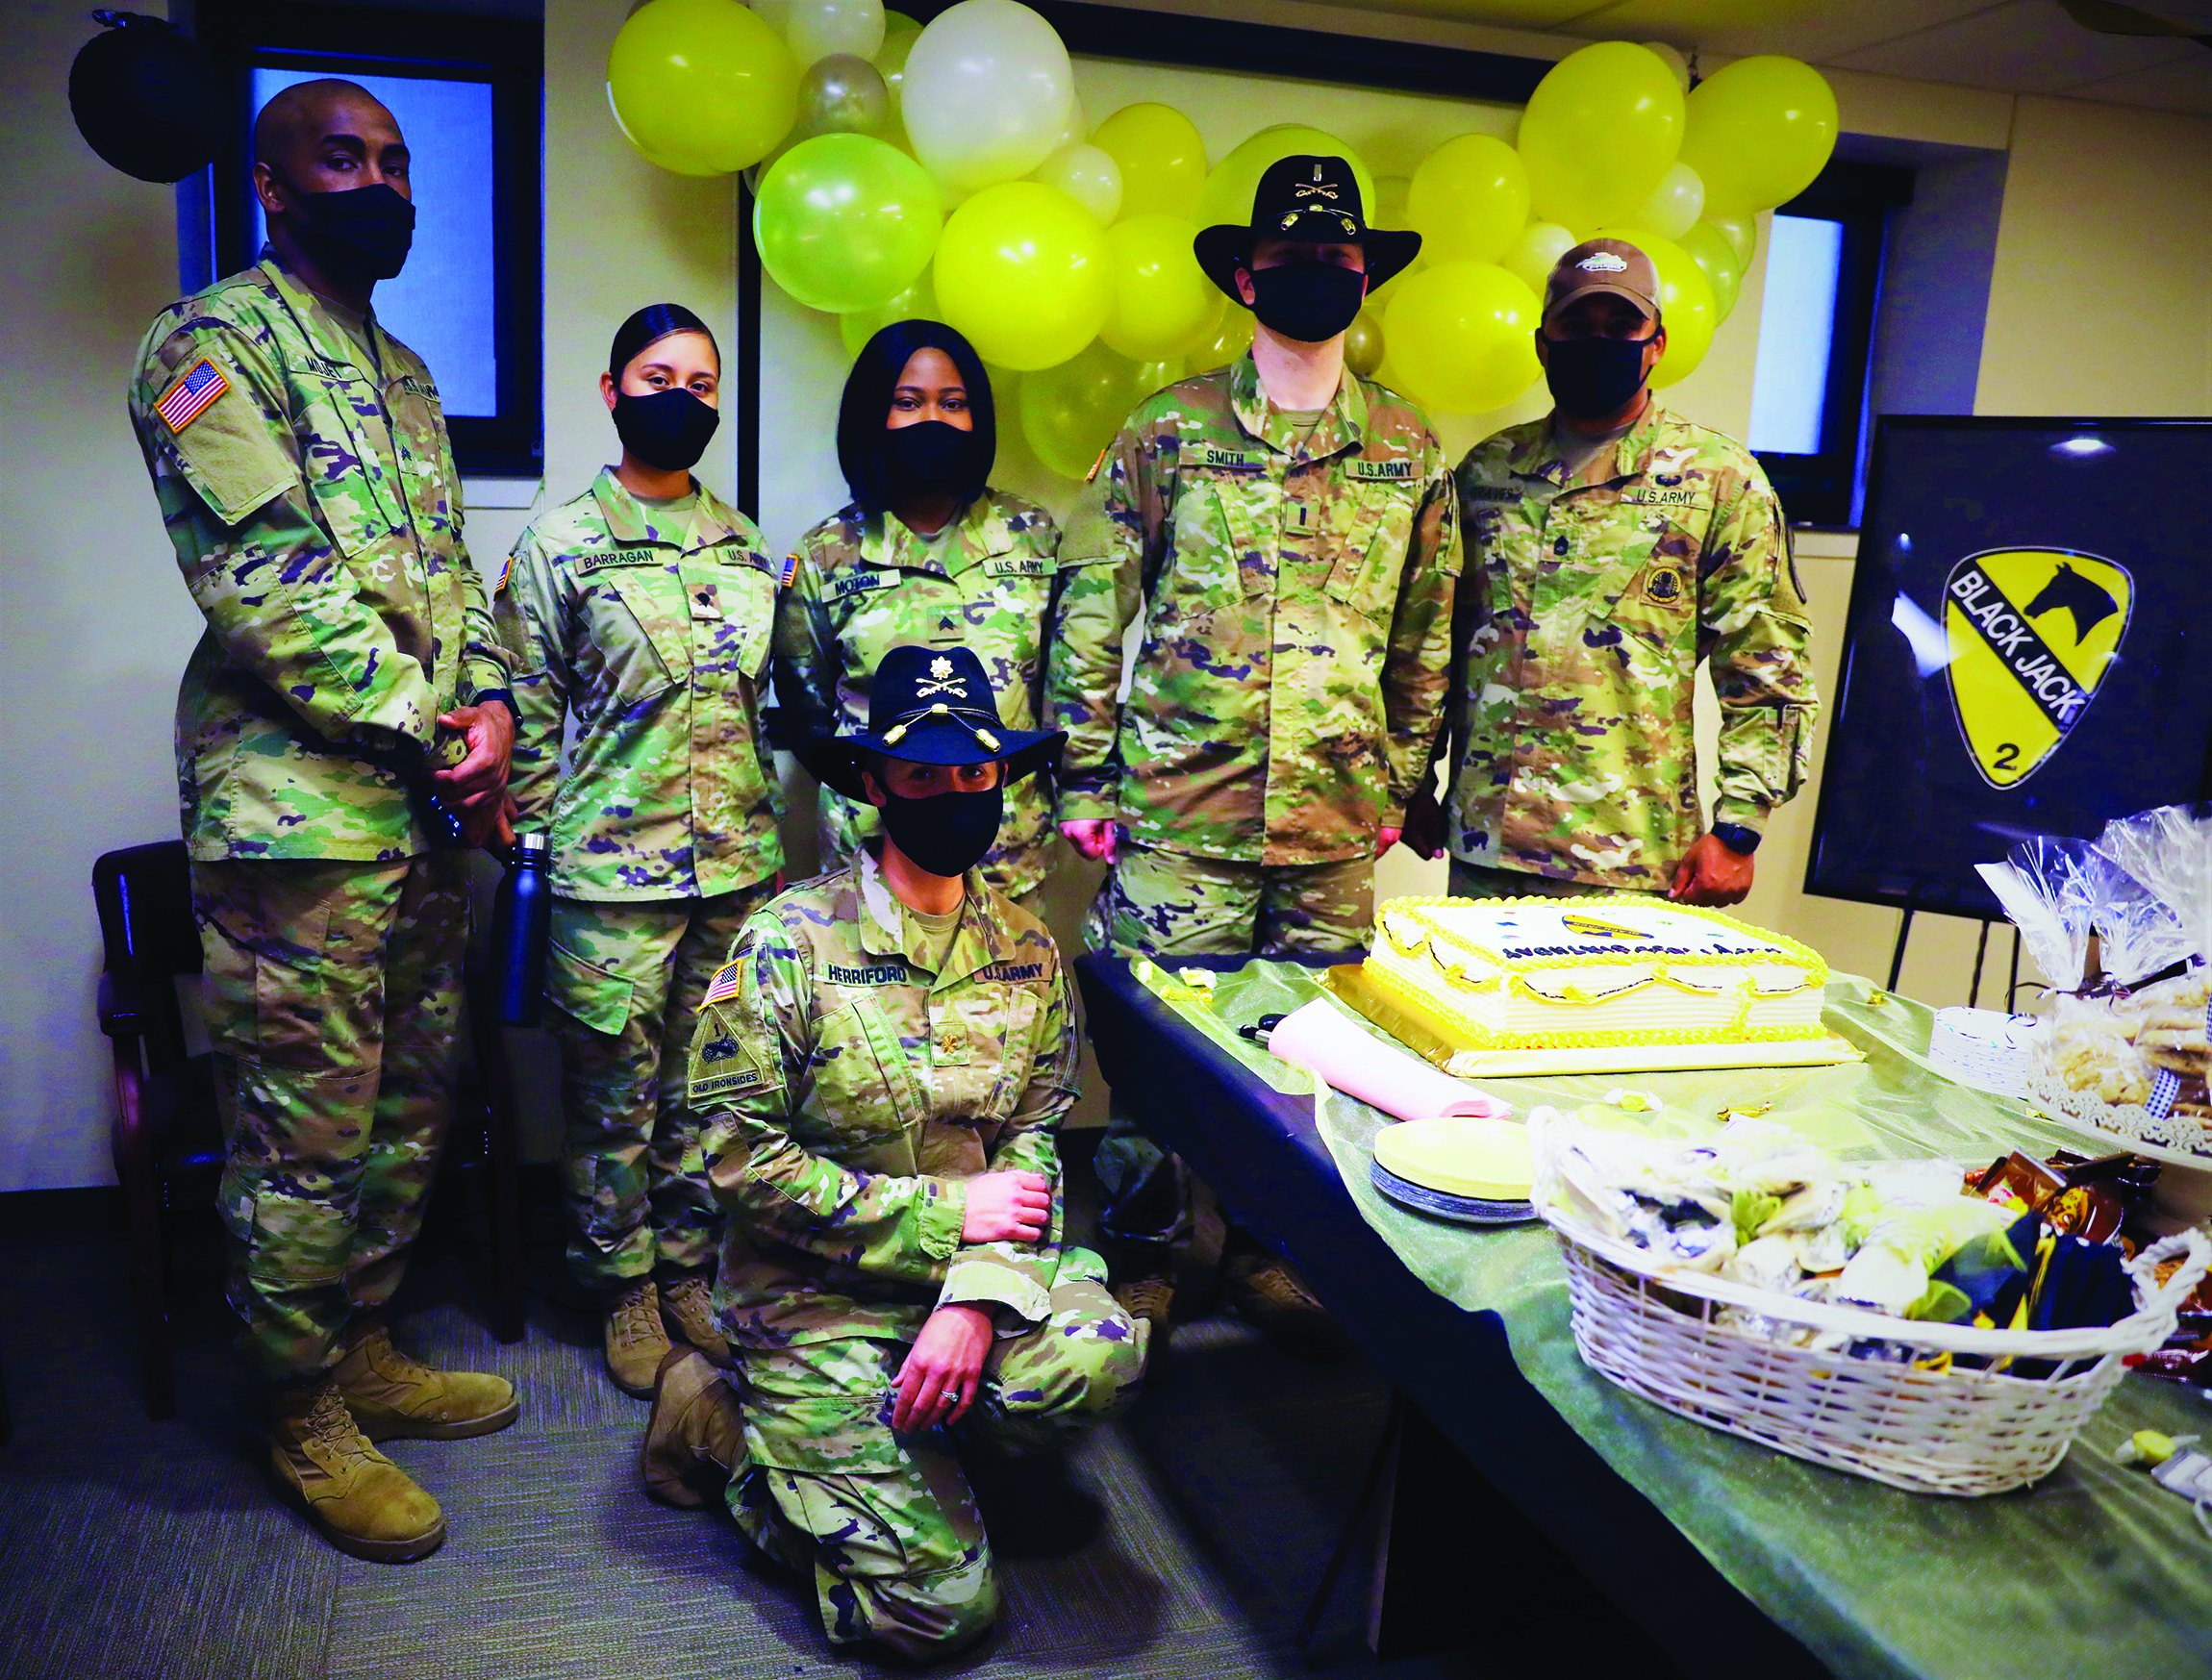 The 2d Armored Brigade Combat Team “Black Jack” celebrated its 103d birthday on 29 August 2020. This birthday bash was more special due to the fact that two of its Soldiers had just won the 1st Calvary Division Paralegal Soldier and NCO Boards. Both SPC Barragan and SGT Moton received a coin from the Brigade CSM and were able to cut the cake. Pictured from left to right: SGT Mojet (Paralegal NCO), SPC Barragan (Paralegal SPC), SGT Moton (Paralegal NCO), 1LT Smith (Admin Law/NSL), SFC Graves (Senior Paralegal NCO); front: MAJ Herriford (Brigade Judge Advocate). 